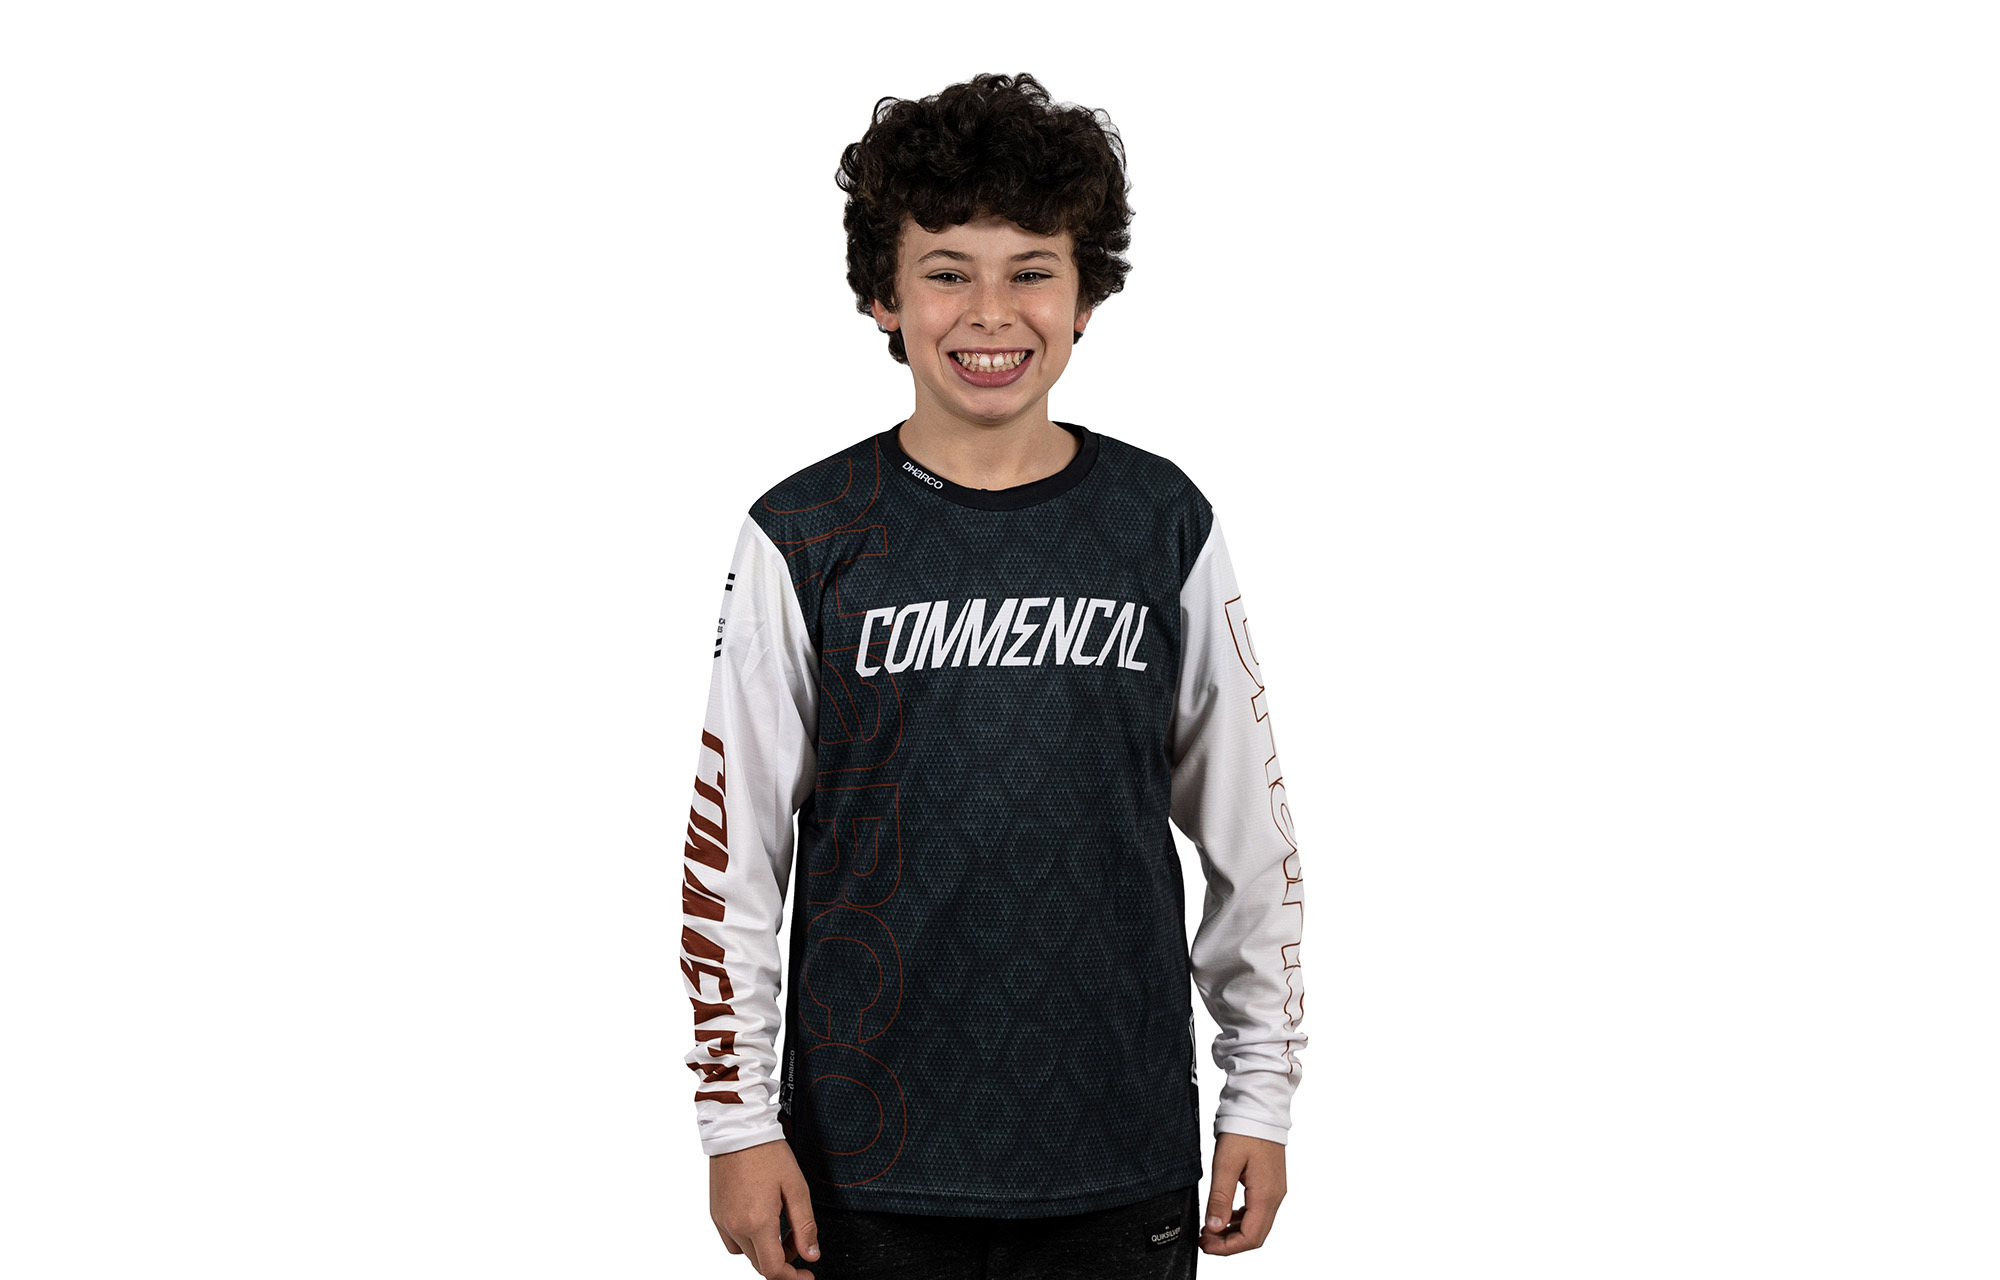 COMMENCAL/DHARCO KIDS RAMPAGE EDITION LONG SLEEVE JERSEY image number 0